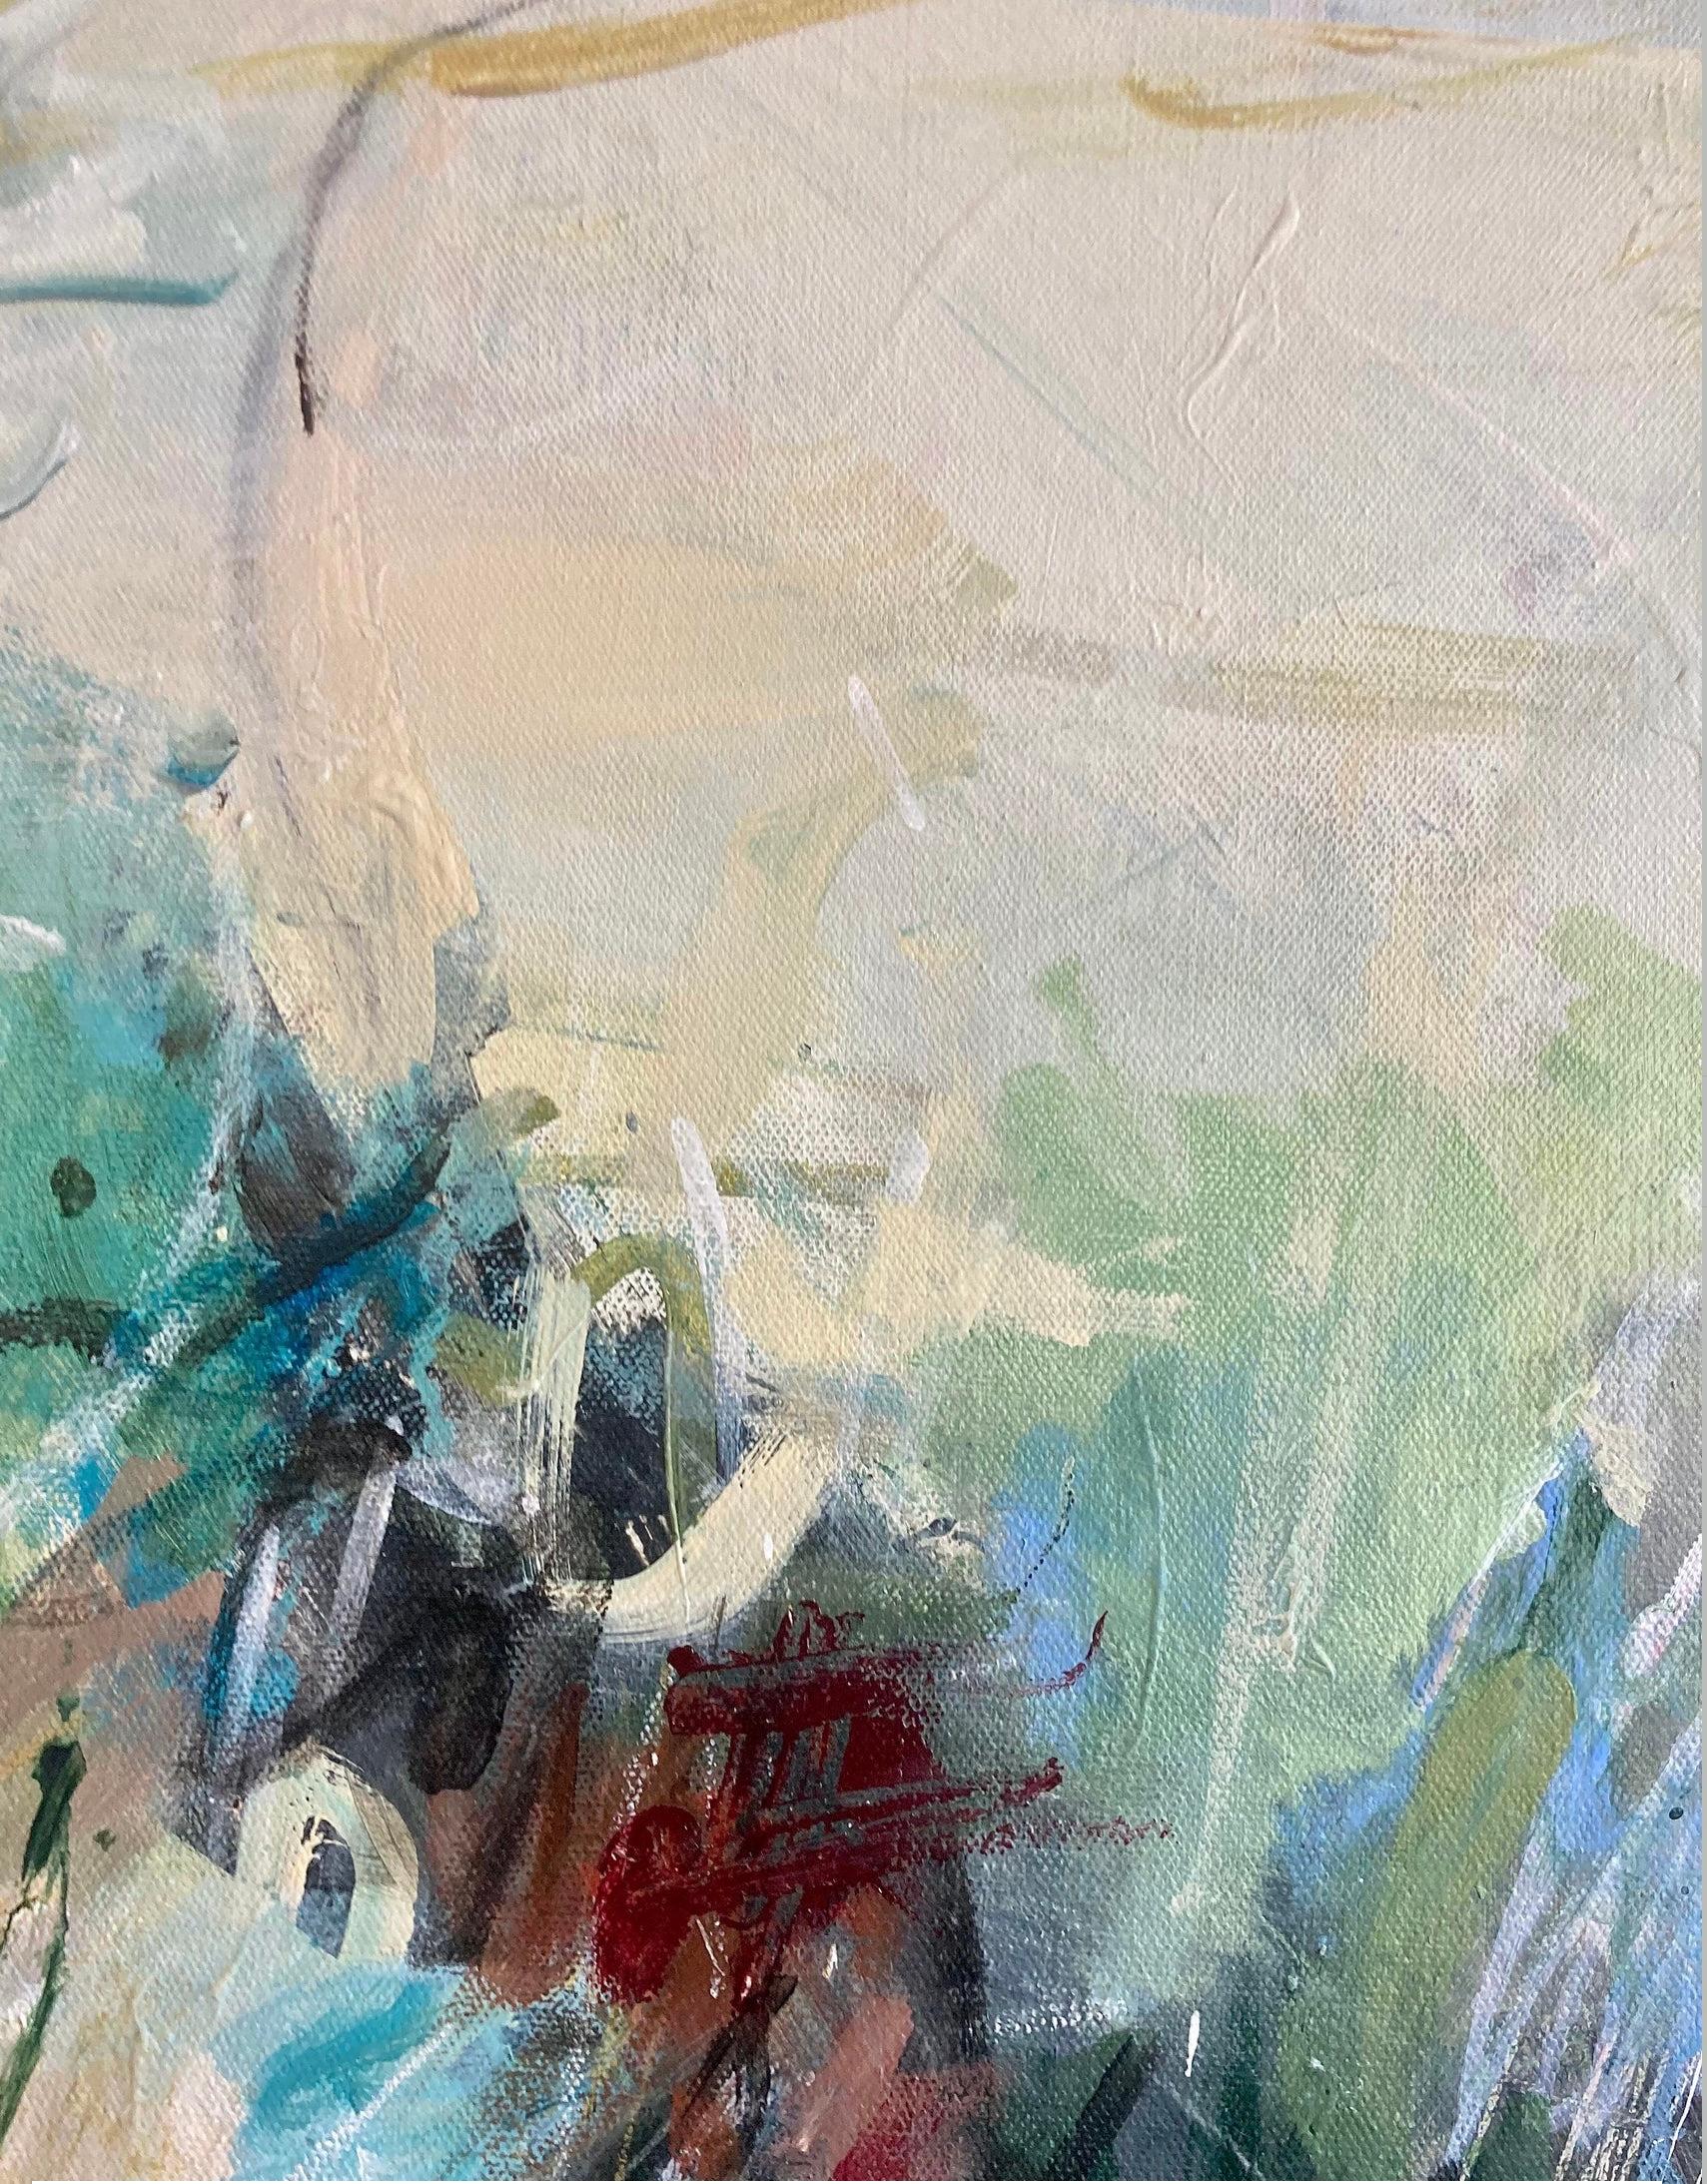 Large original modern abstract landscape painting. 
Titled: ‘Second Chances’
This original mixed media painting features acrylics, graphite, inks, and oil pastel on canvas. It is gestural, and passionate in it’s movement texture, texture and